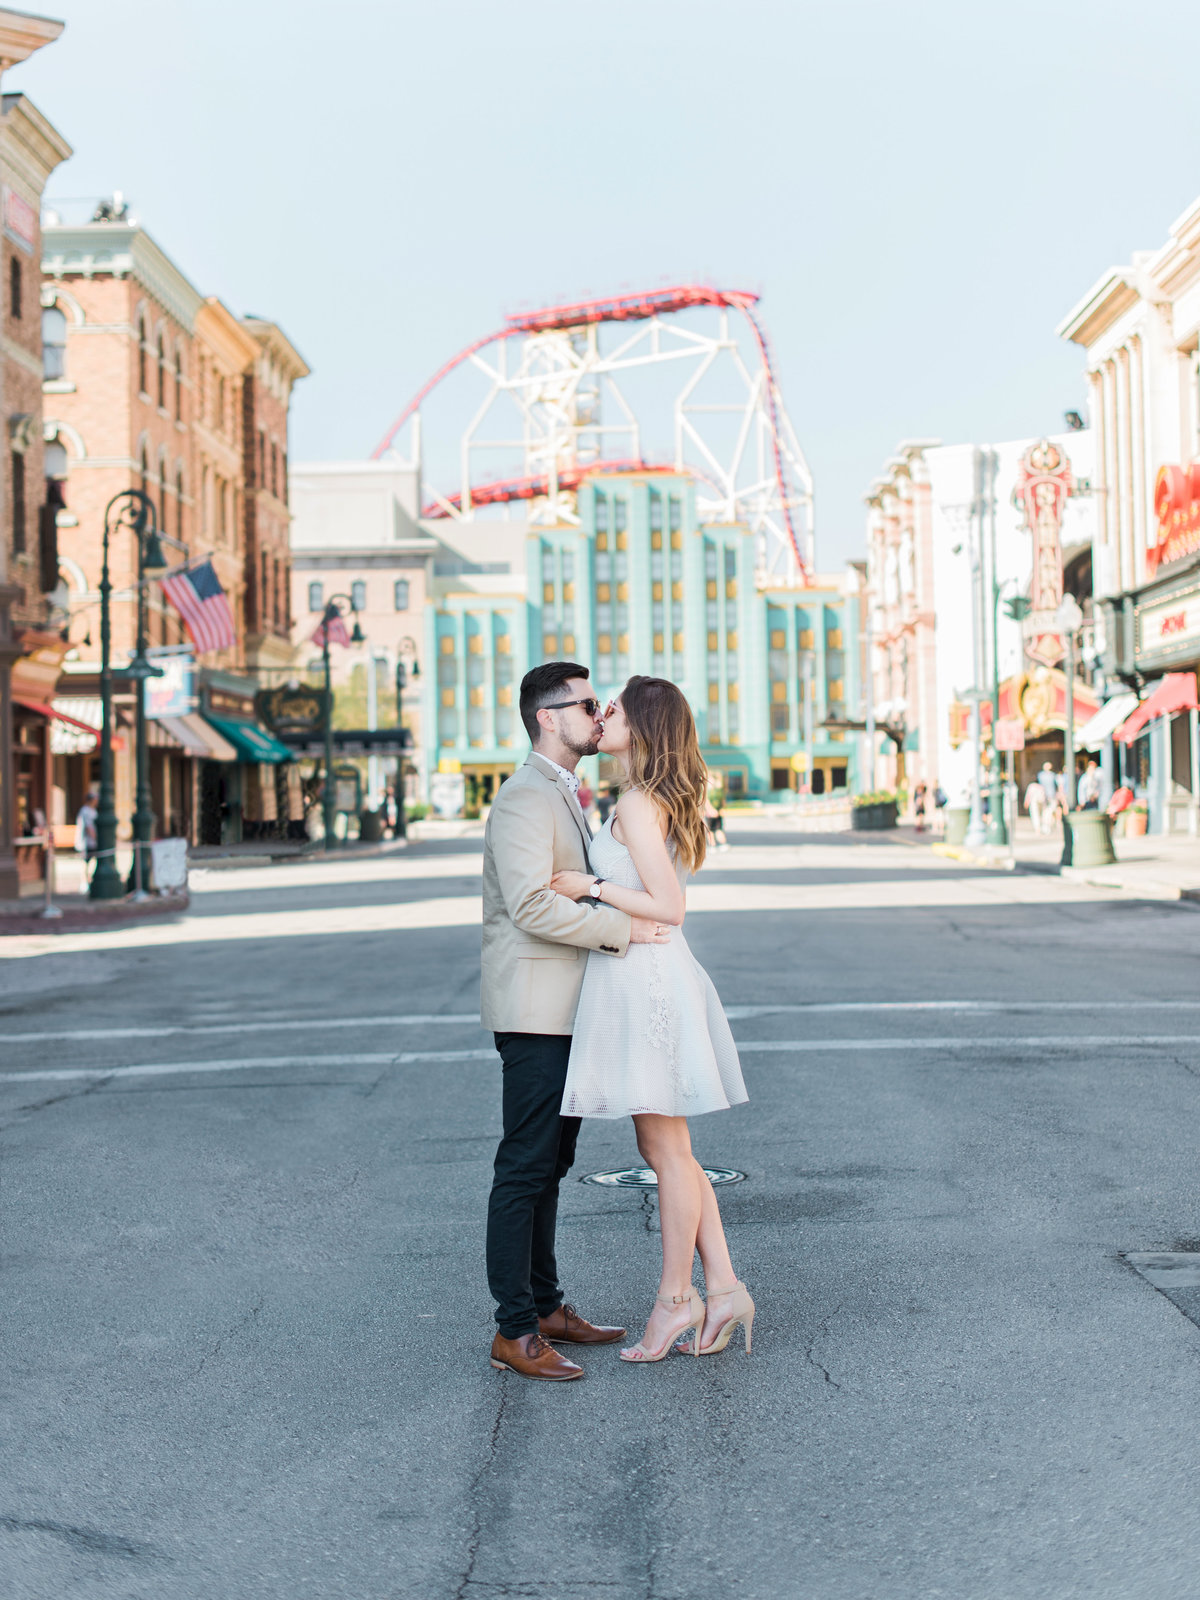 Couple kissing in Islands of Adventure during engagement session in front of roller coaster